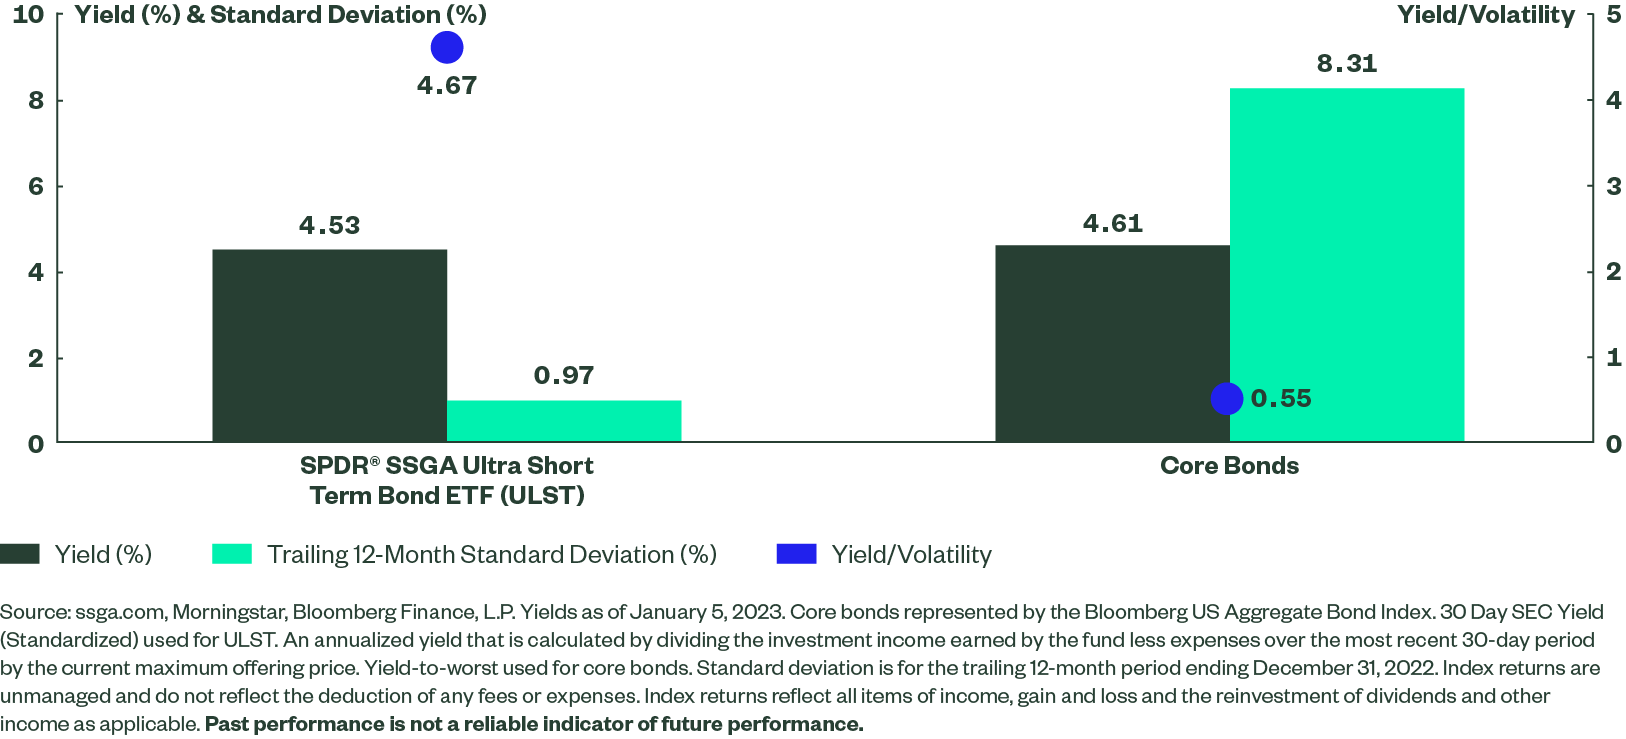 A column chart showing the yield and standard deviation of core bonds and ULST